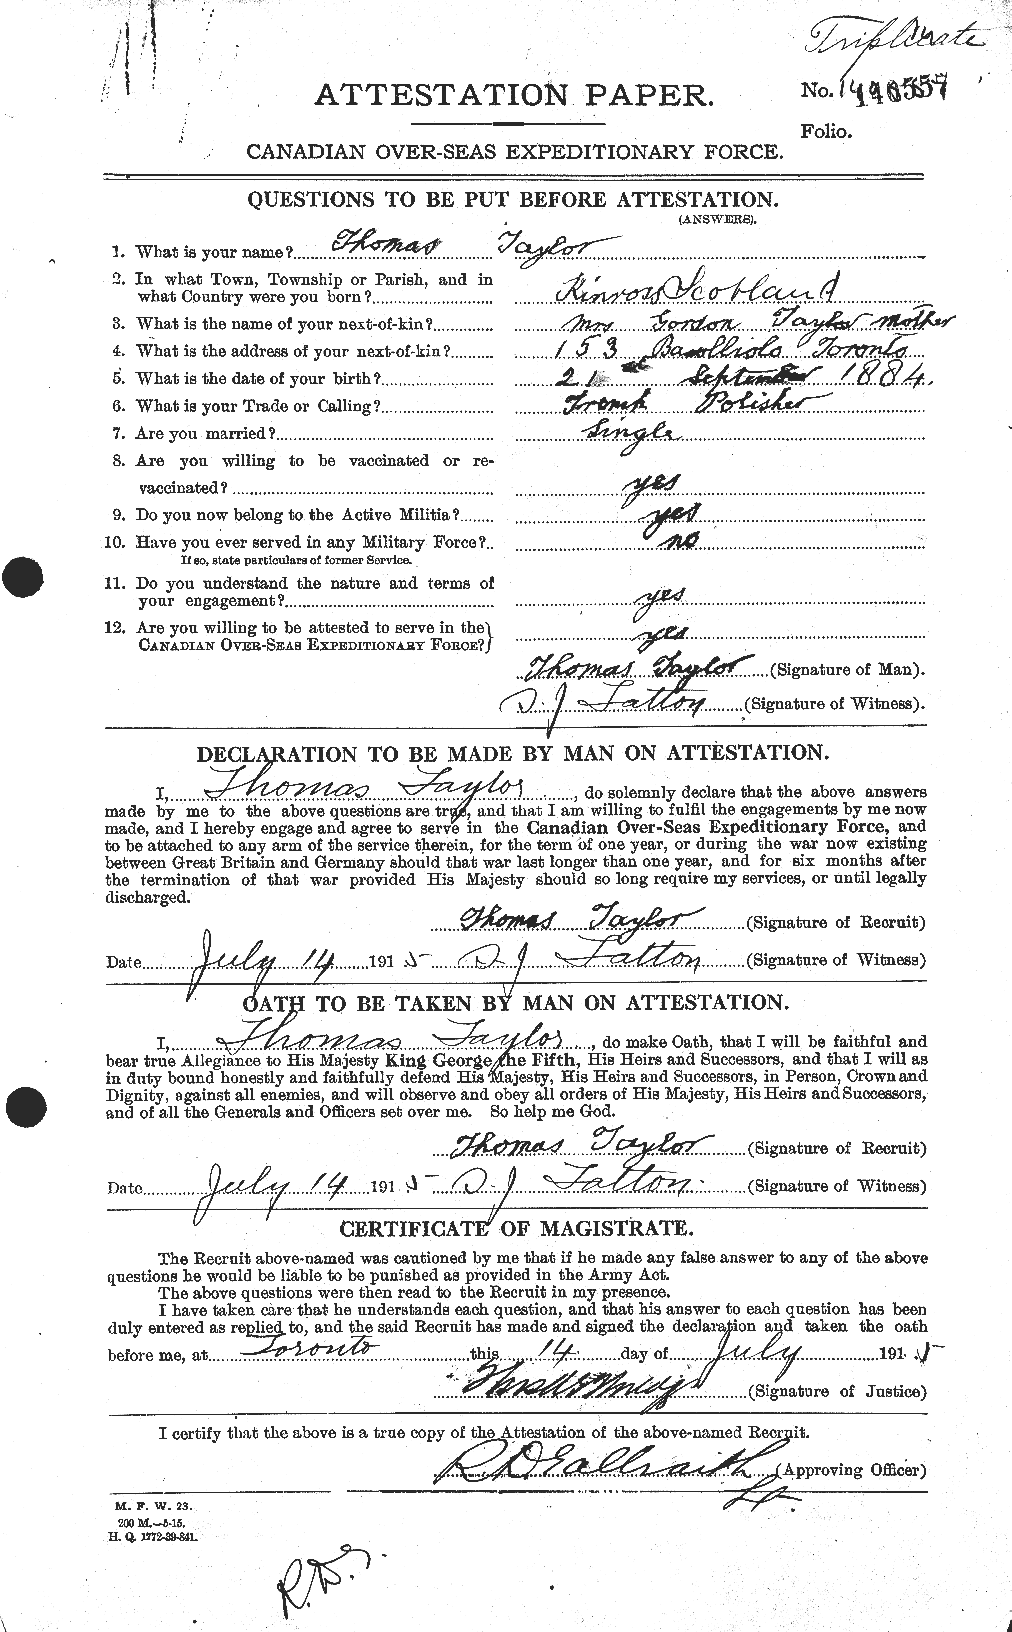 Personnel Records of the First World War - CEF 627948a